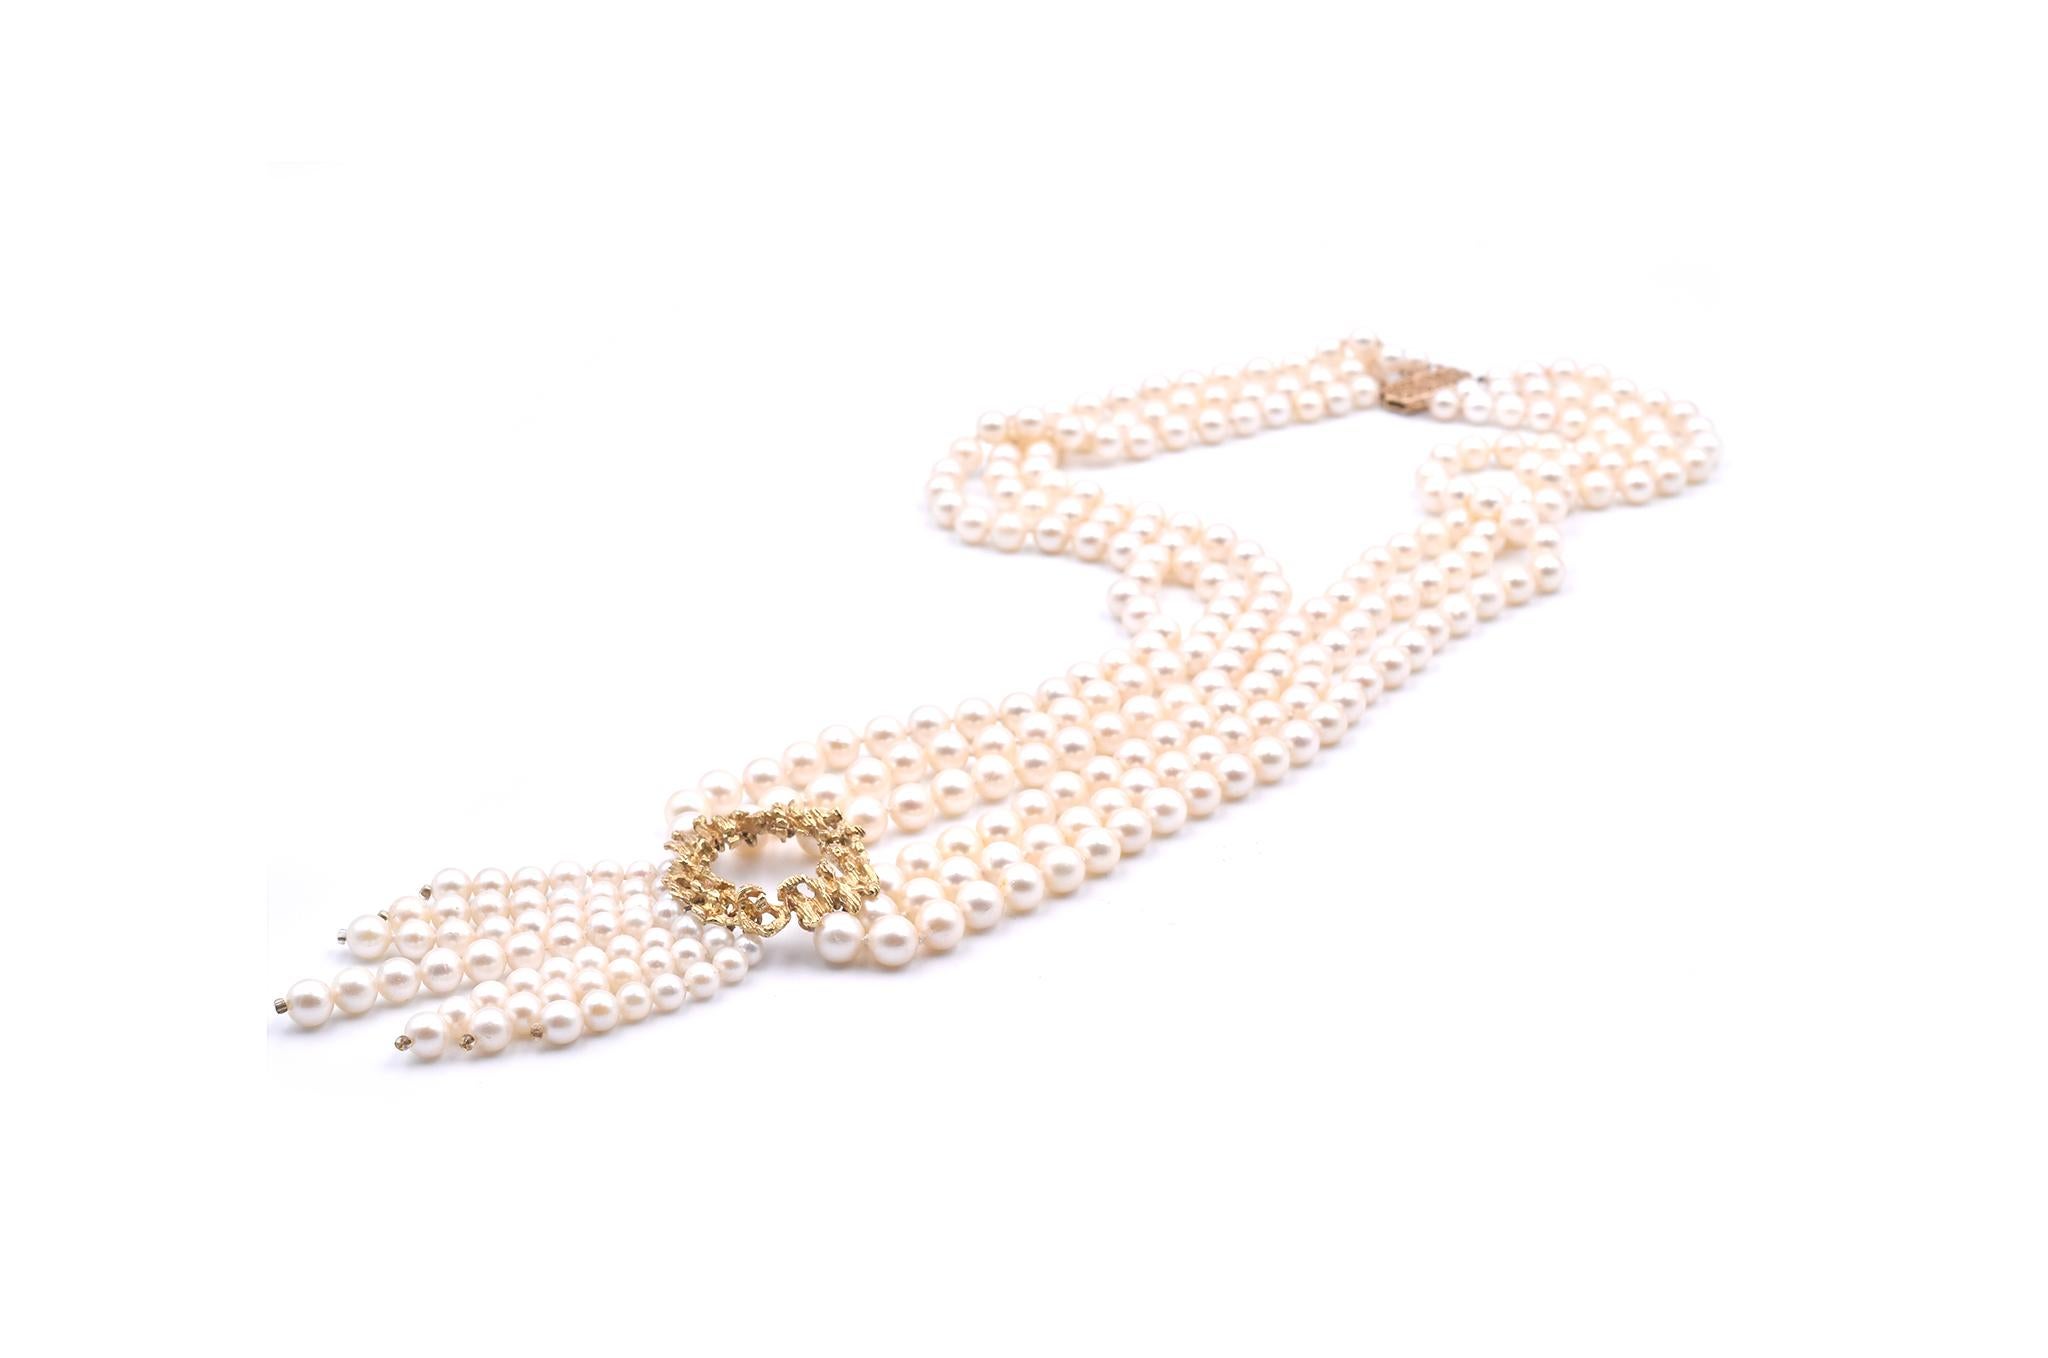 Women's 14 Karat Yellow Gold Akoya Cultured Pearl Necklace with Centerpiece Pearl Drops